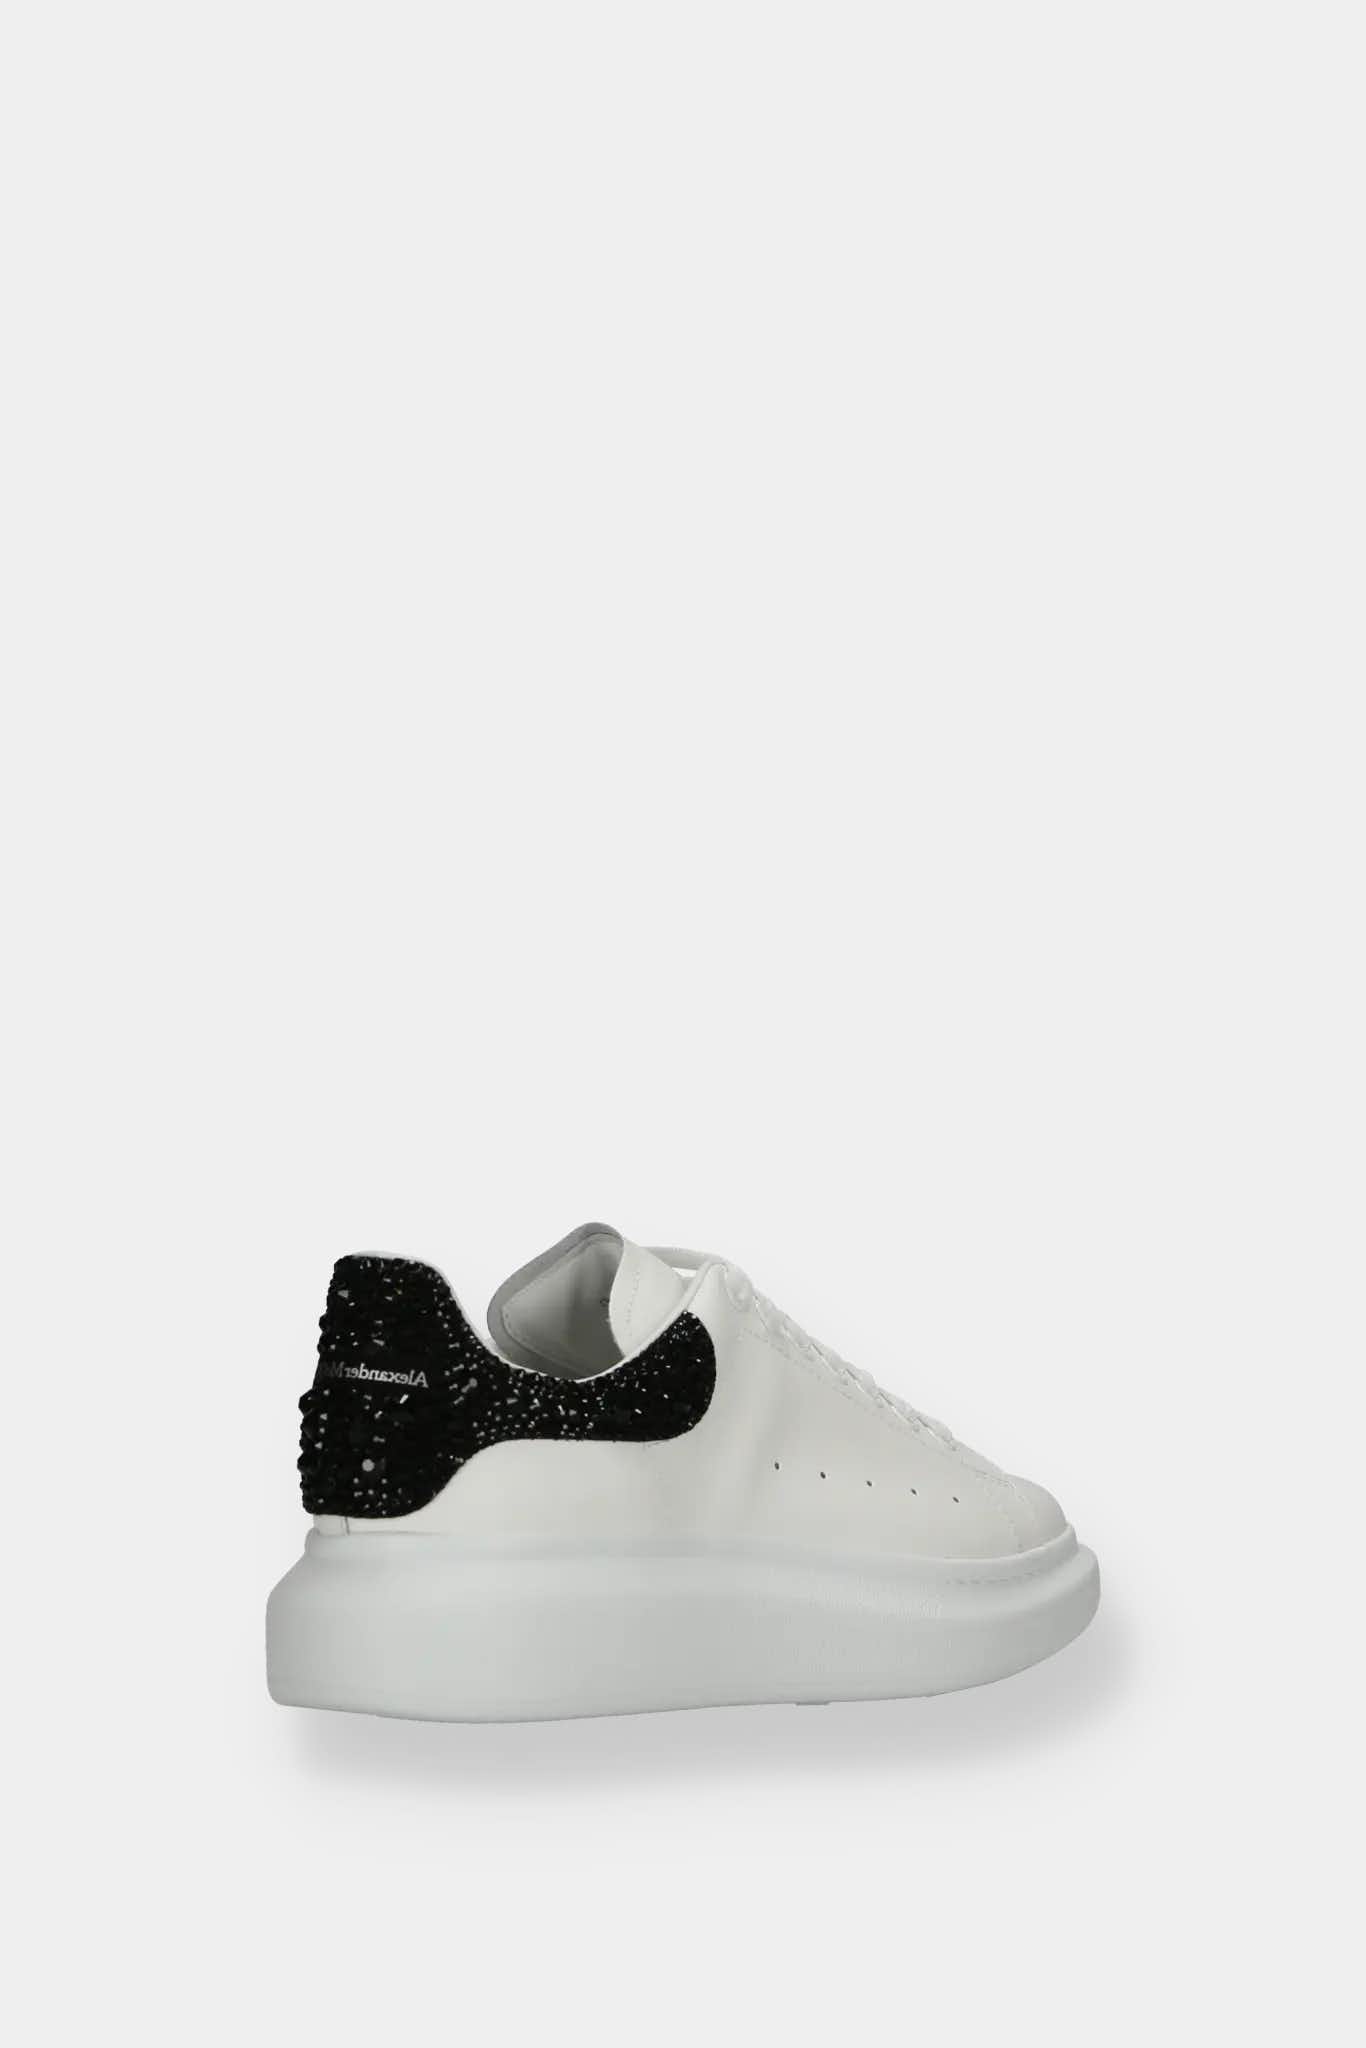 Alexander McQueen Sneakers oversize Men 625156WHXMT8986 Leather White Blue  467,5€